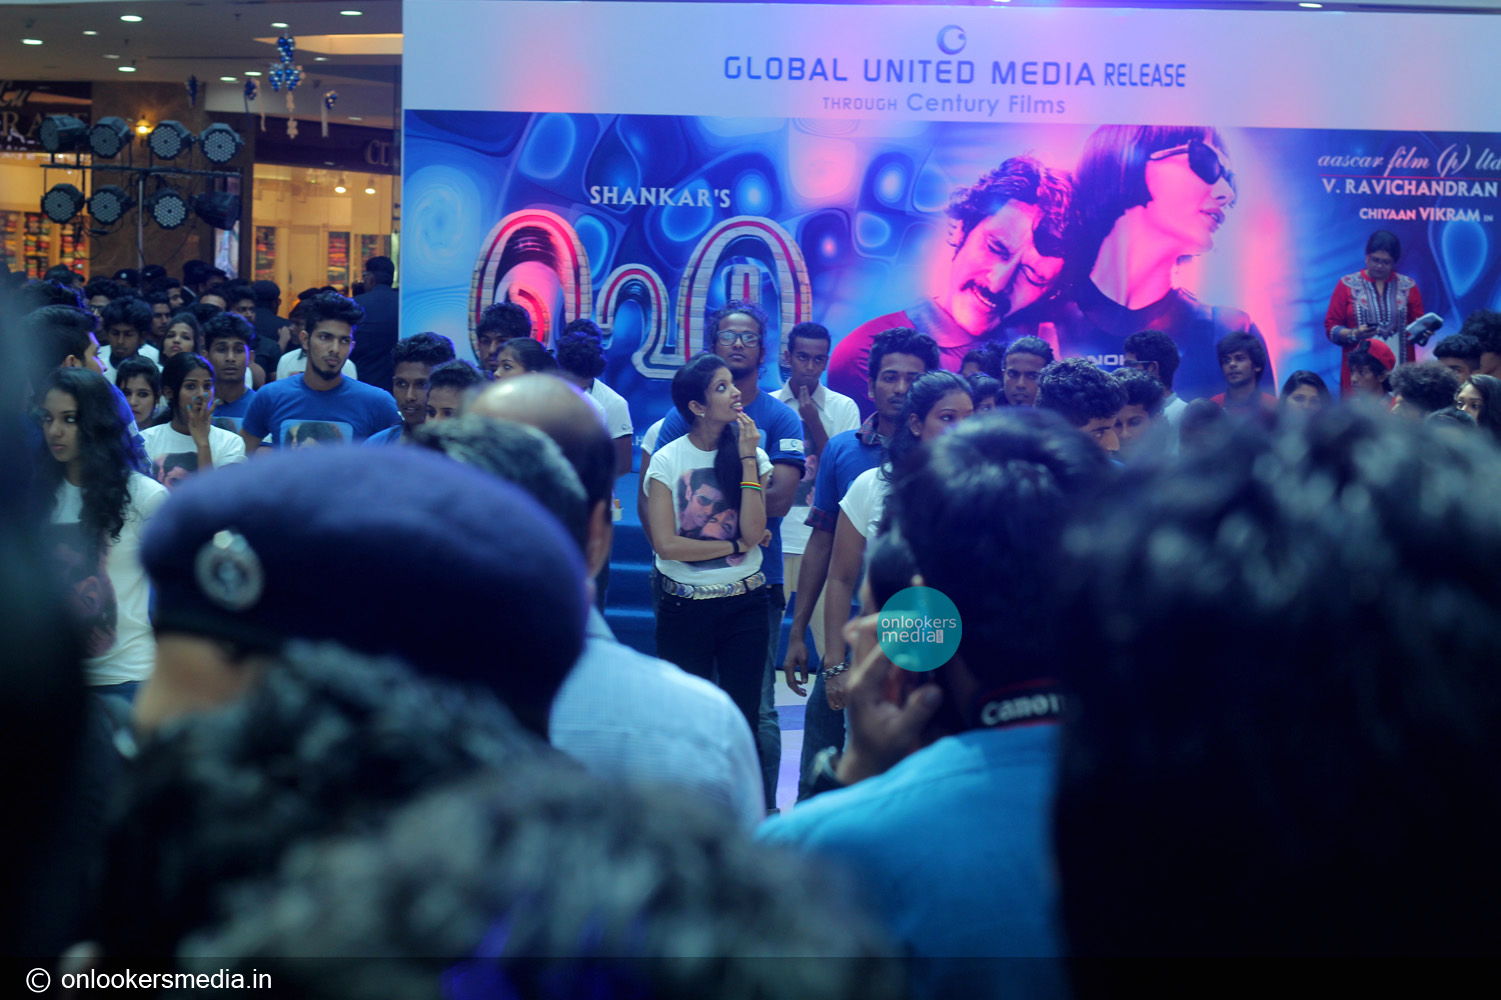 http://onlookersmedia.in/wp-content/uploads/2015/01/I-promotional-function-at-Lulu-mall-Kerala-Vikram-Amy-Jackson-Onlookers-Media-26.jpg